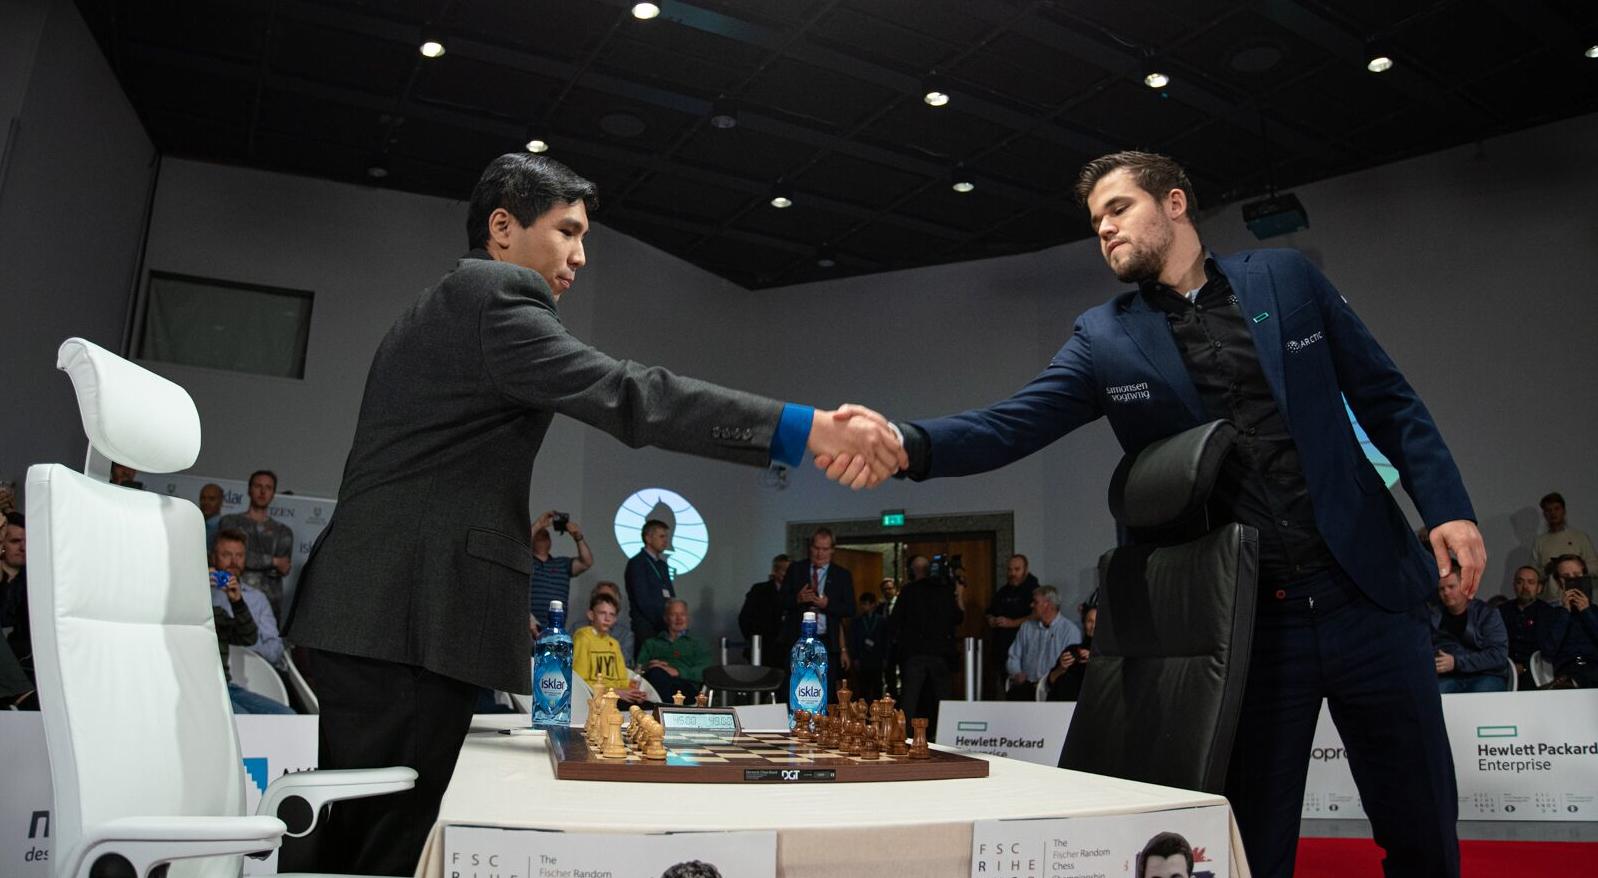 Chessify on X: Wesley So defeats Magnus Carlsen 13.5 - 2.5 to become the  first official FIDE Fischer Random World Champion. (photo by L. Ootes)  Congrats on a crushing victory! #frchess Congrats